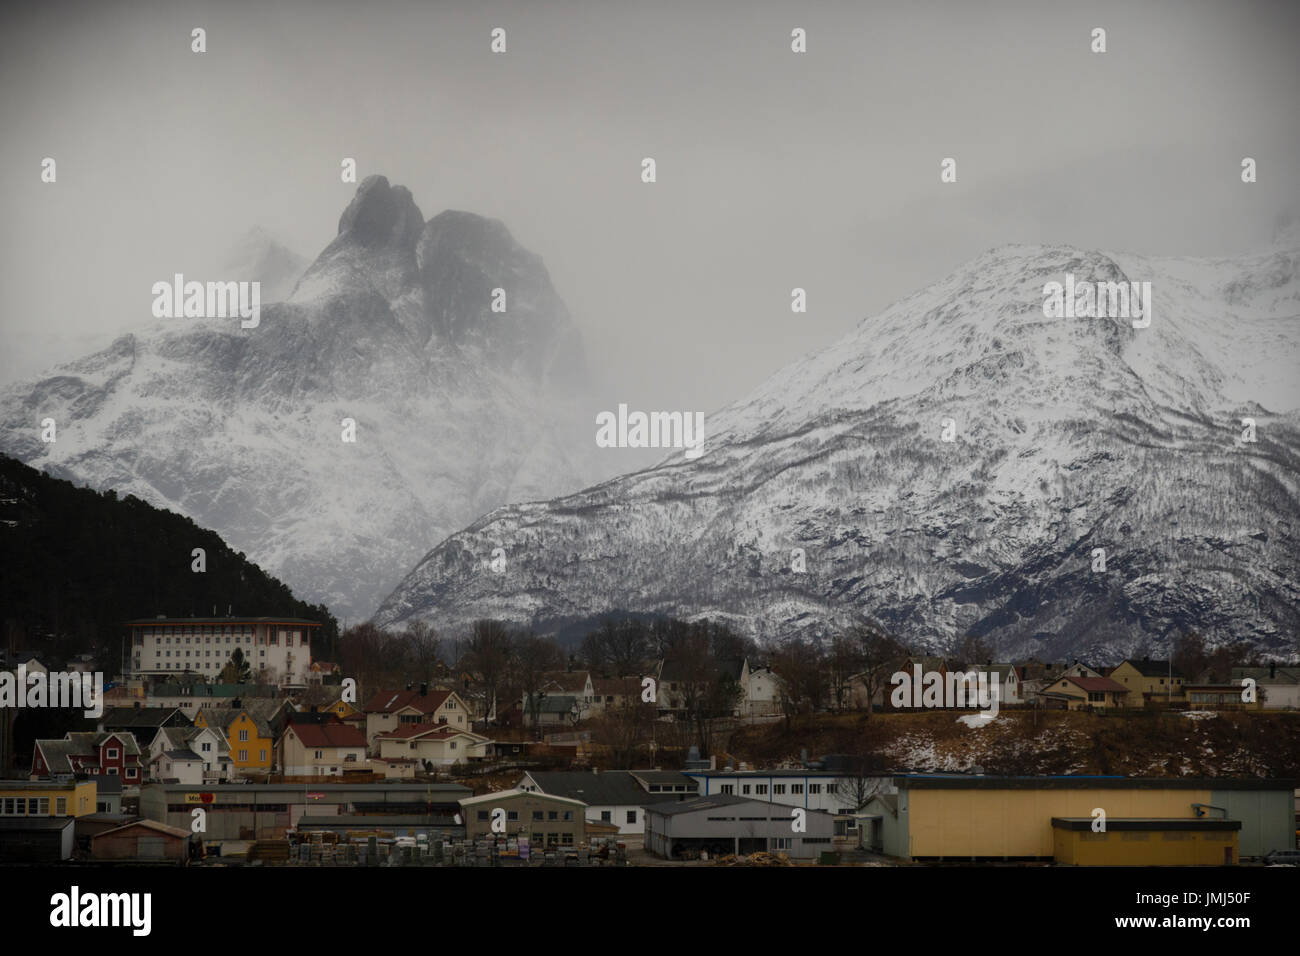 Mountains Looming Over The Town Of Analsnes, Norway Stock Photo